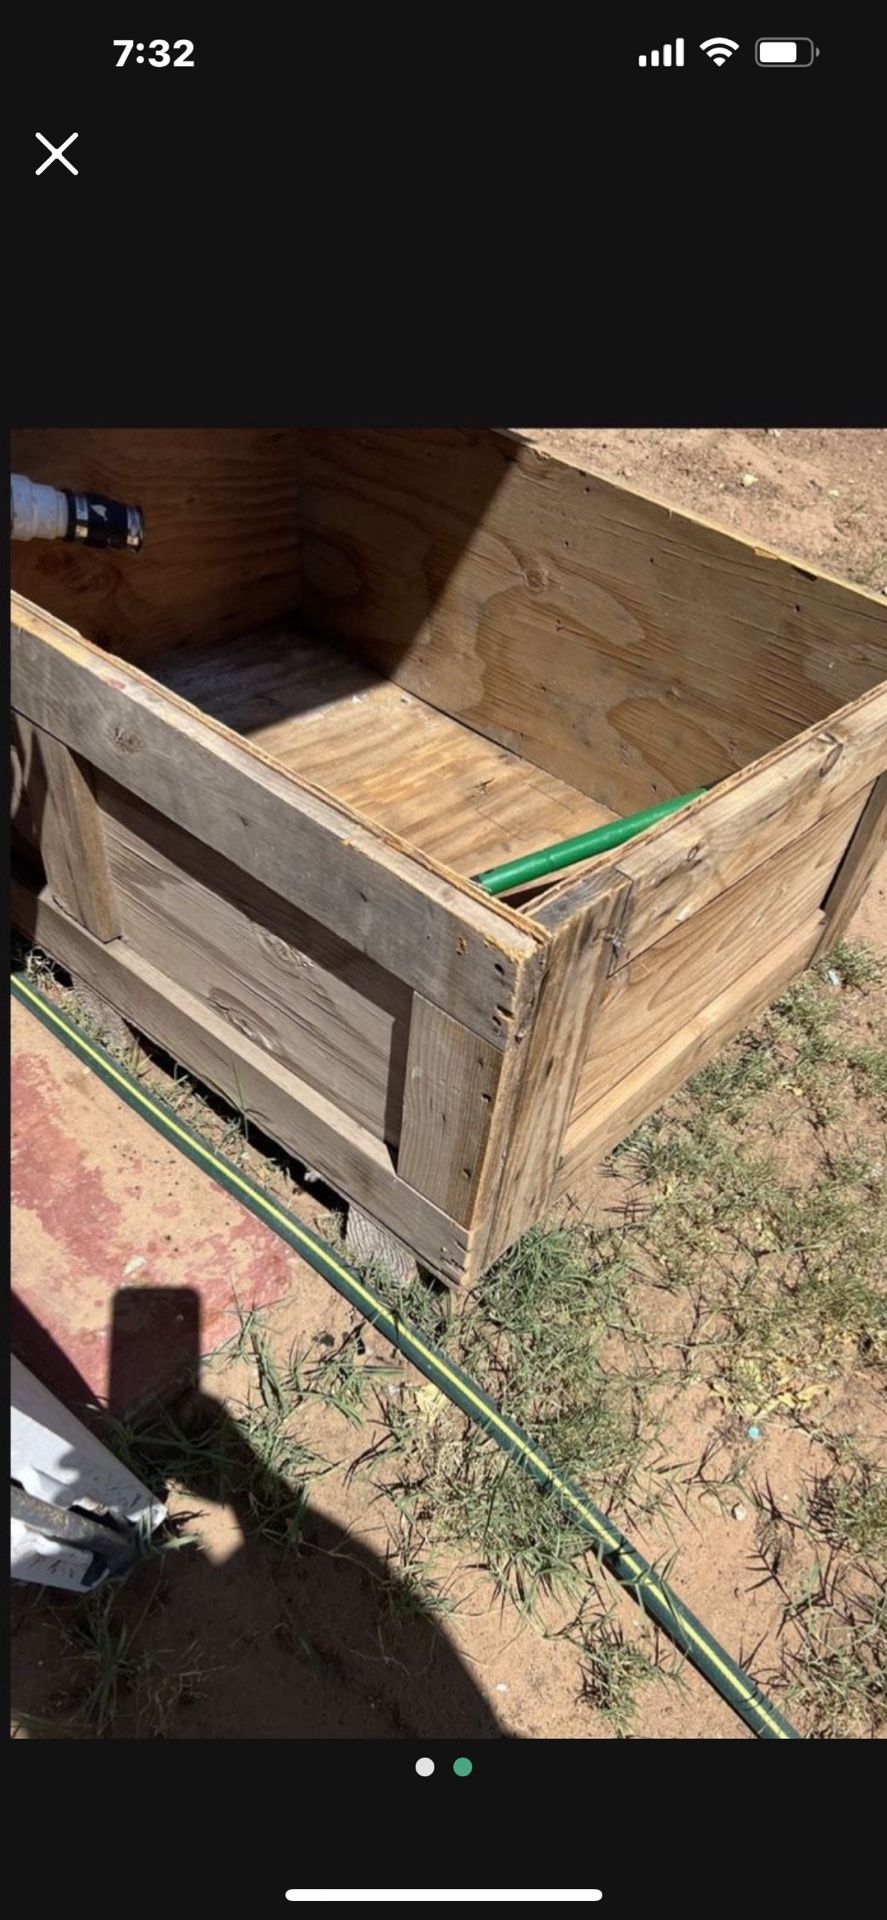 SELLING  EXTRA LARGE  SOLID OAK PLANTERS  each $100.   EACH SQUARE PLANTERS $$75. each ! firm cash only by Yarbrough      PLANTER BOXES CAN VE USED FO